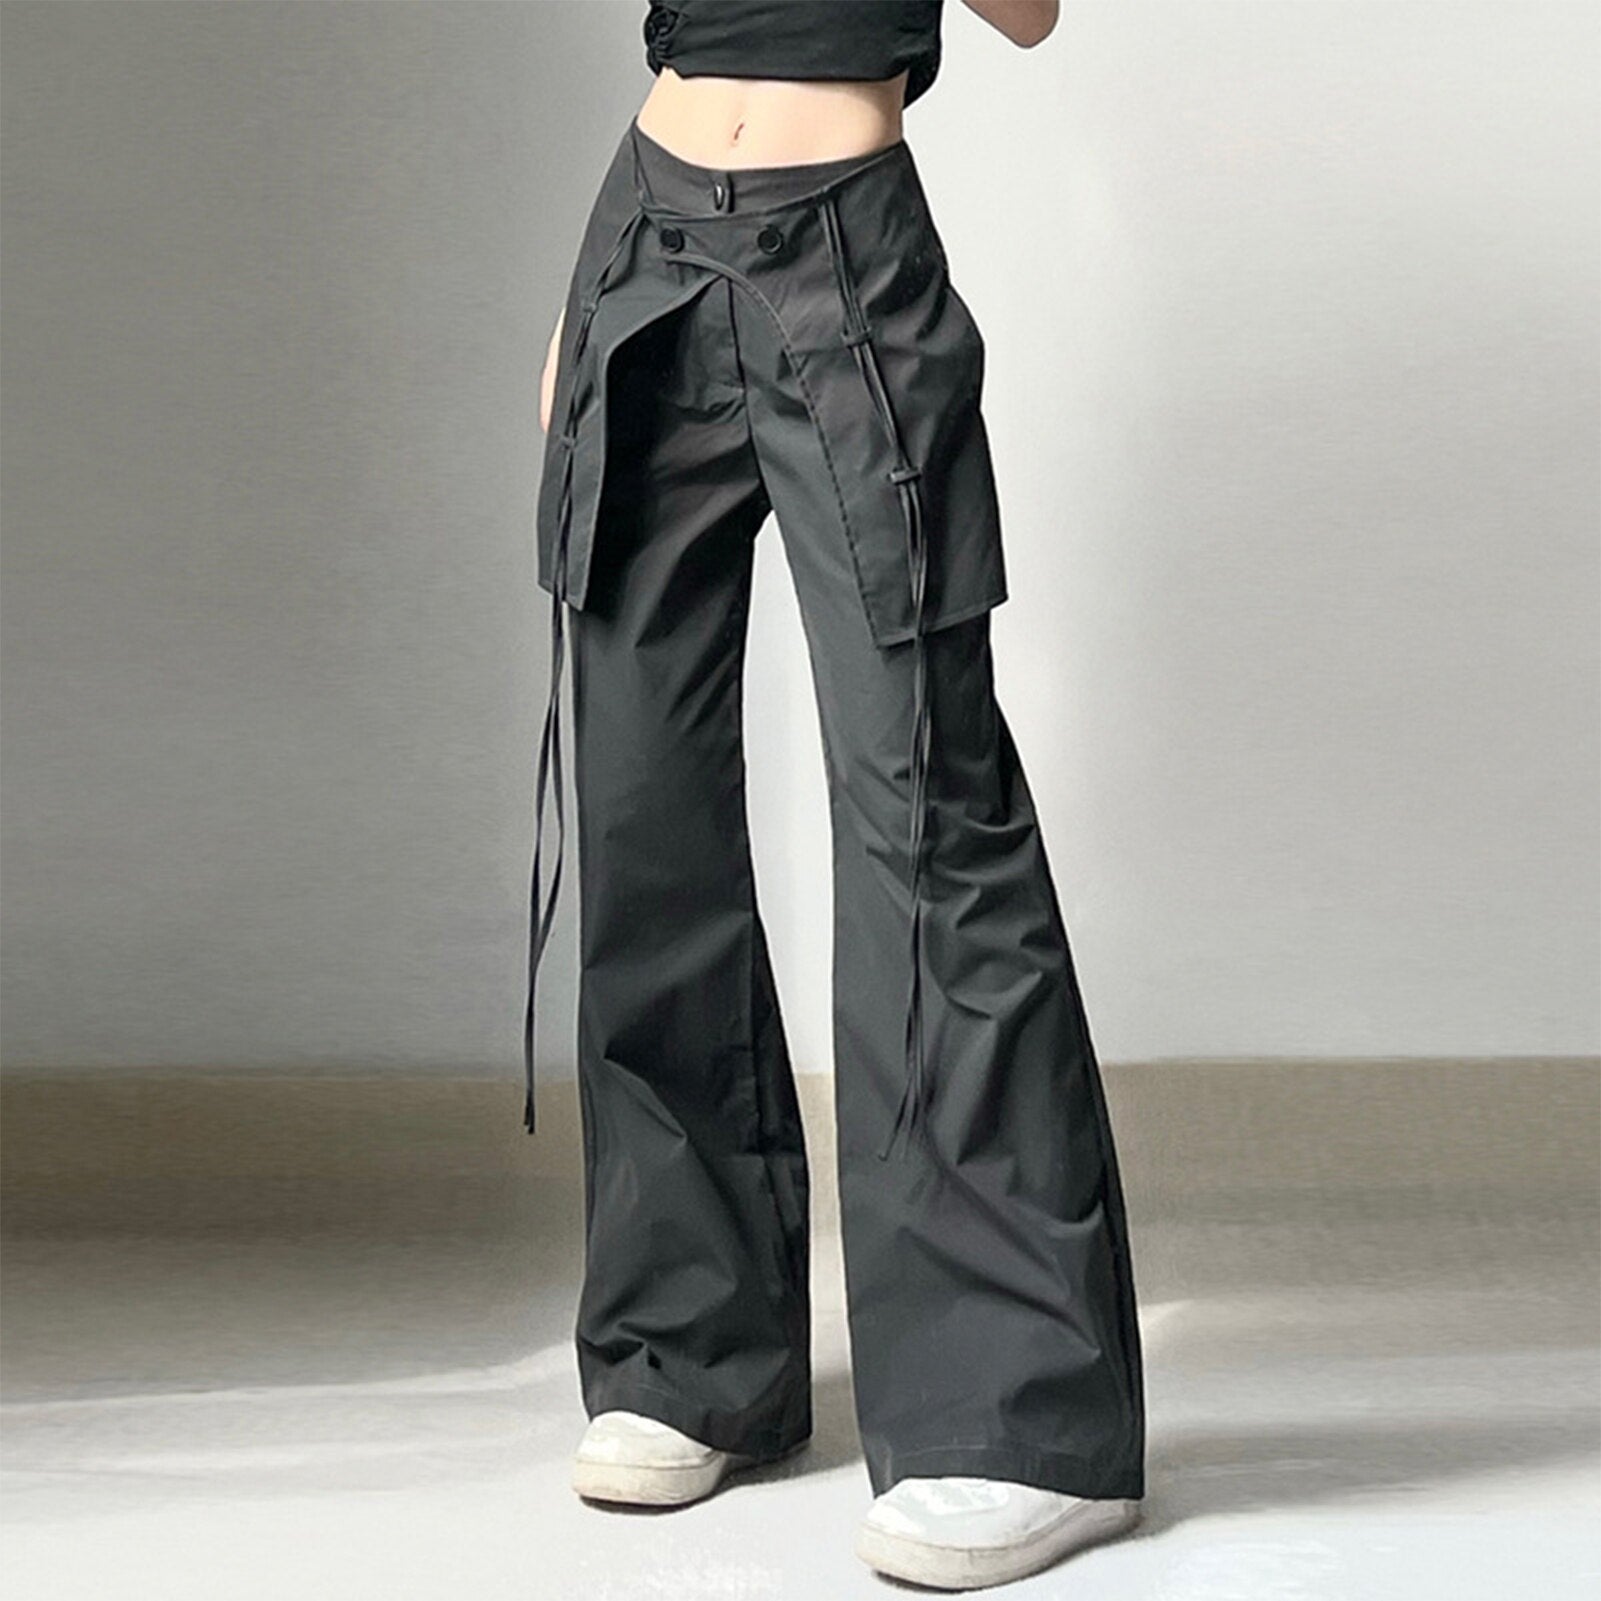 Back to School Y2K Long Pants Mid Waist Women Wide Leg Pants Comfortable Black Solid Color Relaxed Fit Drawstring Streetwear with Large Pockets